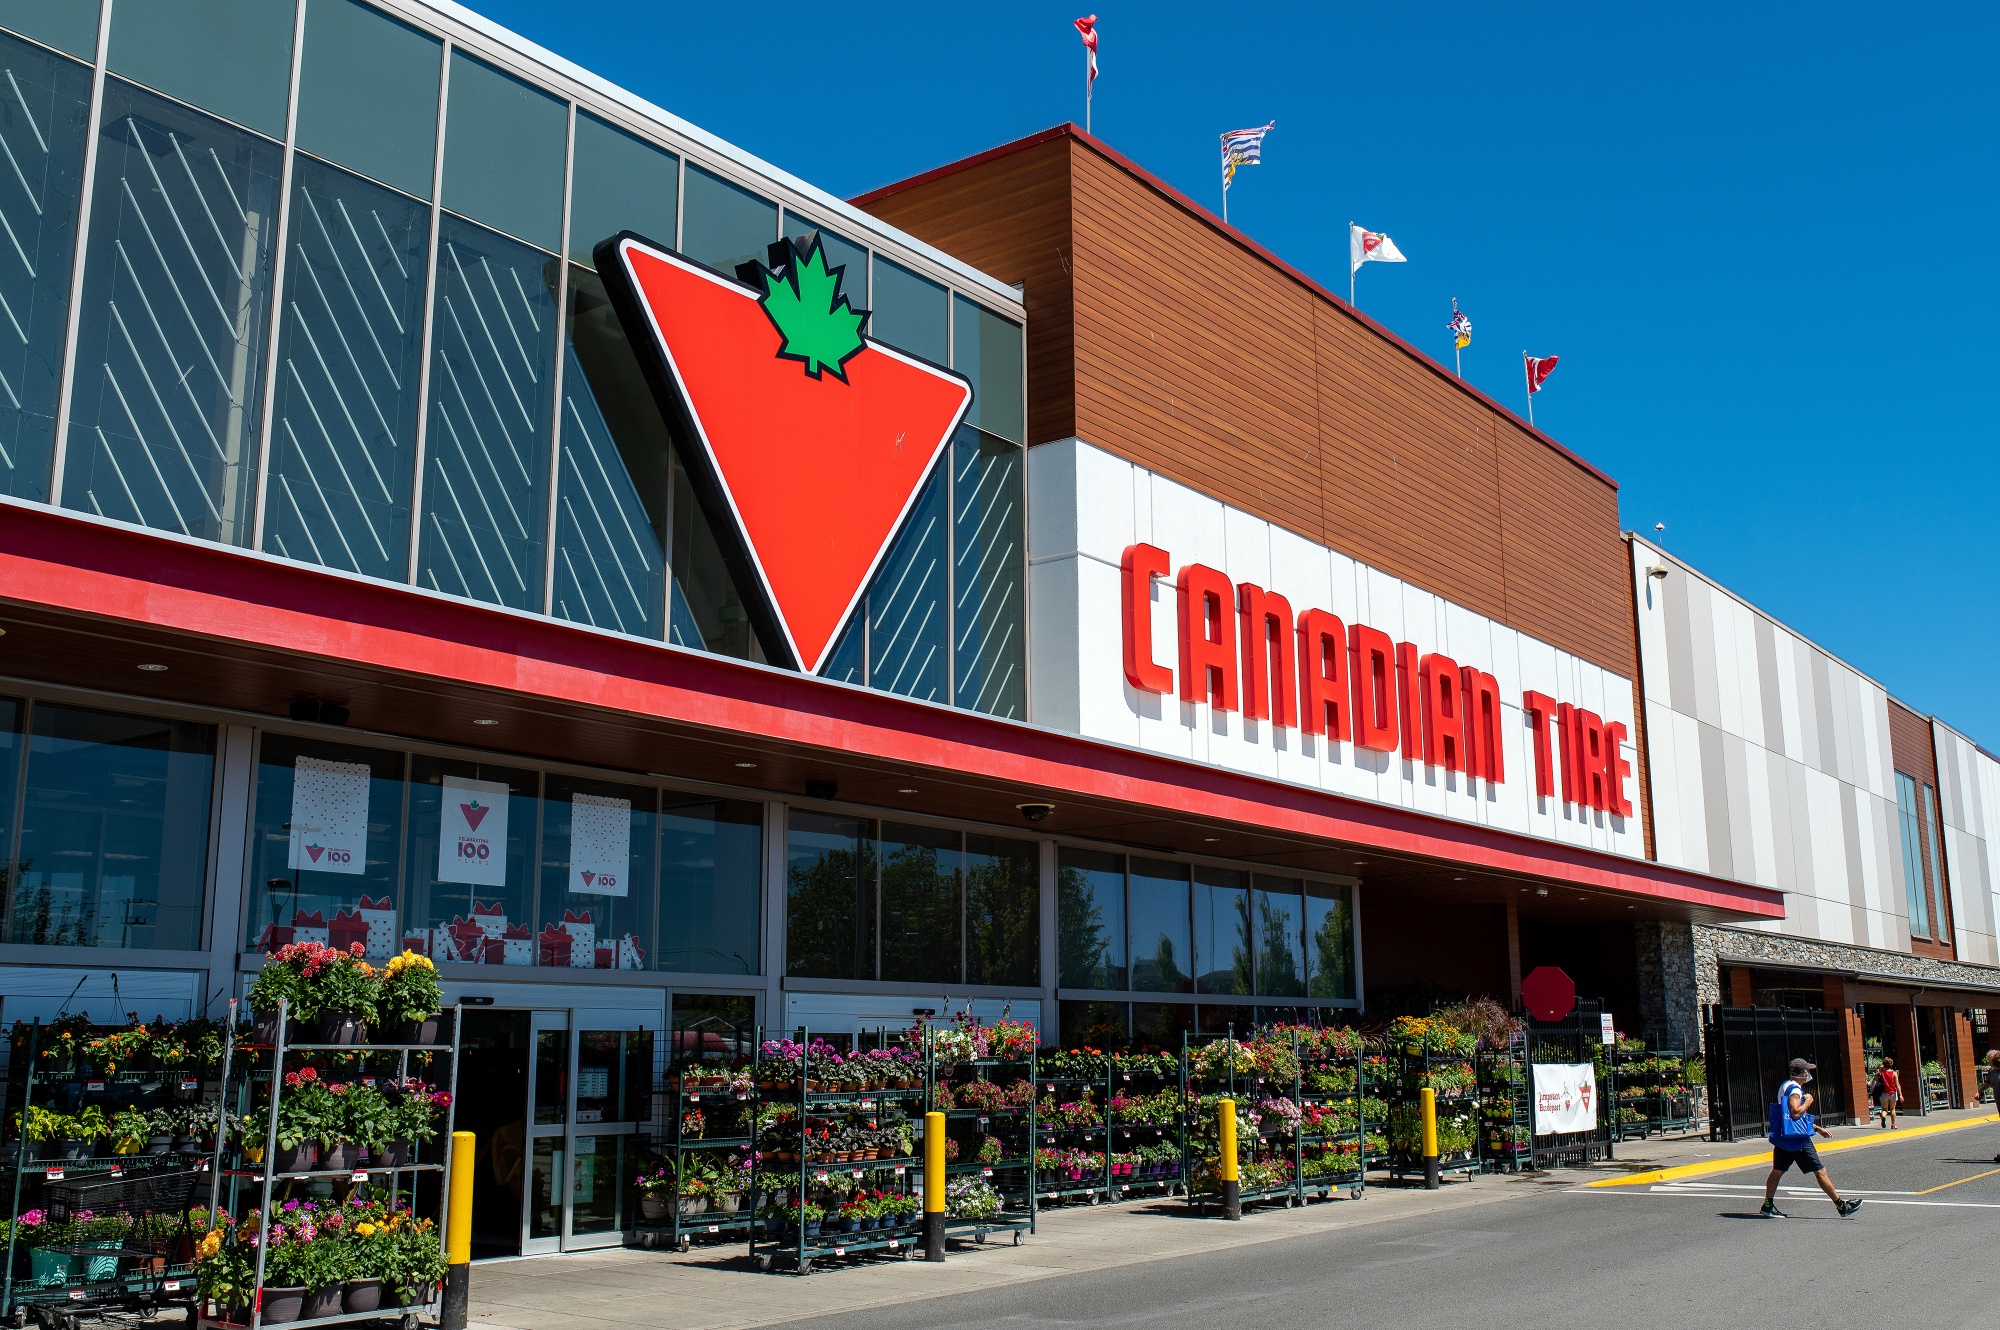 Canadian Tire uses customer data to boost sales